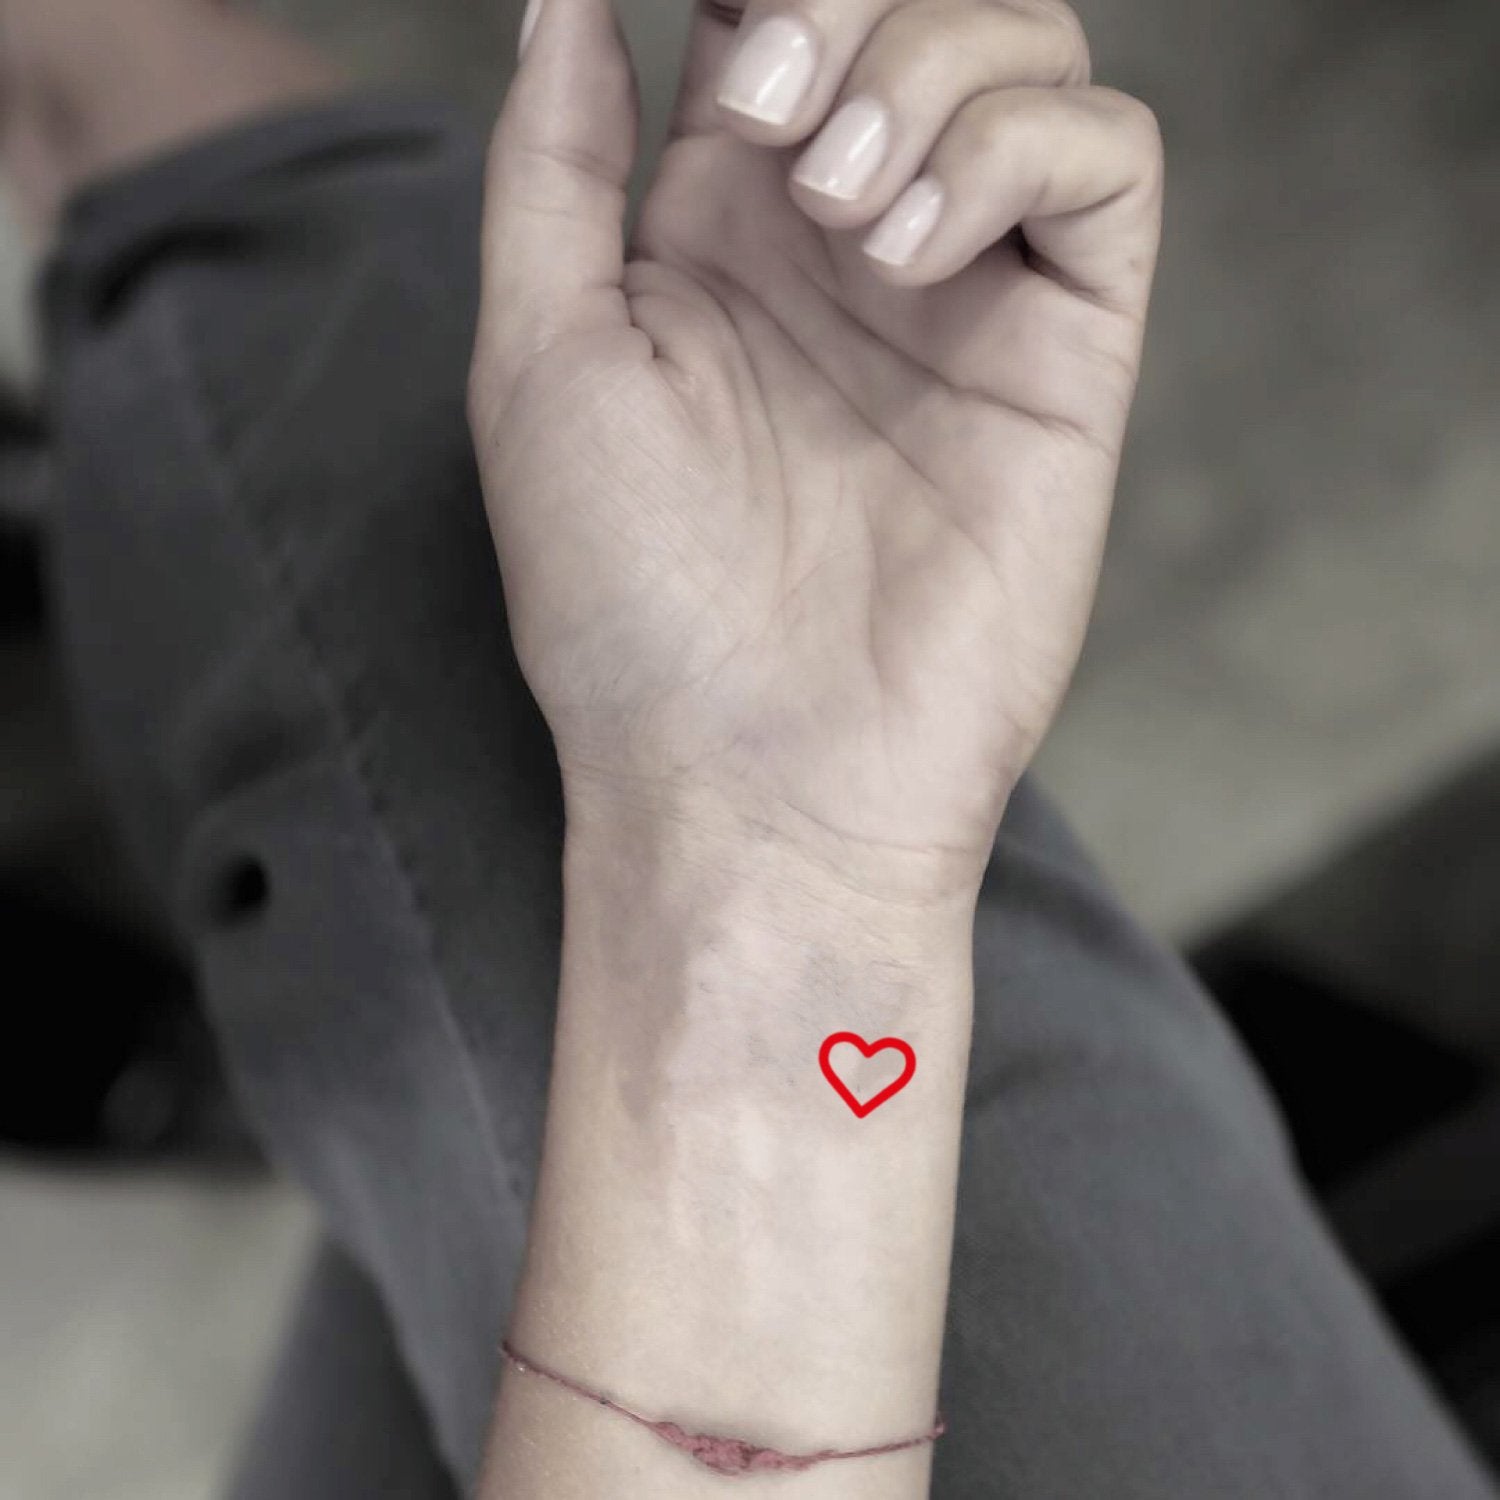 Tattoo tagged with small micro heart wittybutton tiny love ifttt  little red wrist minimalist experimental other  inkedappcom